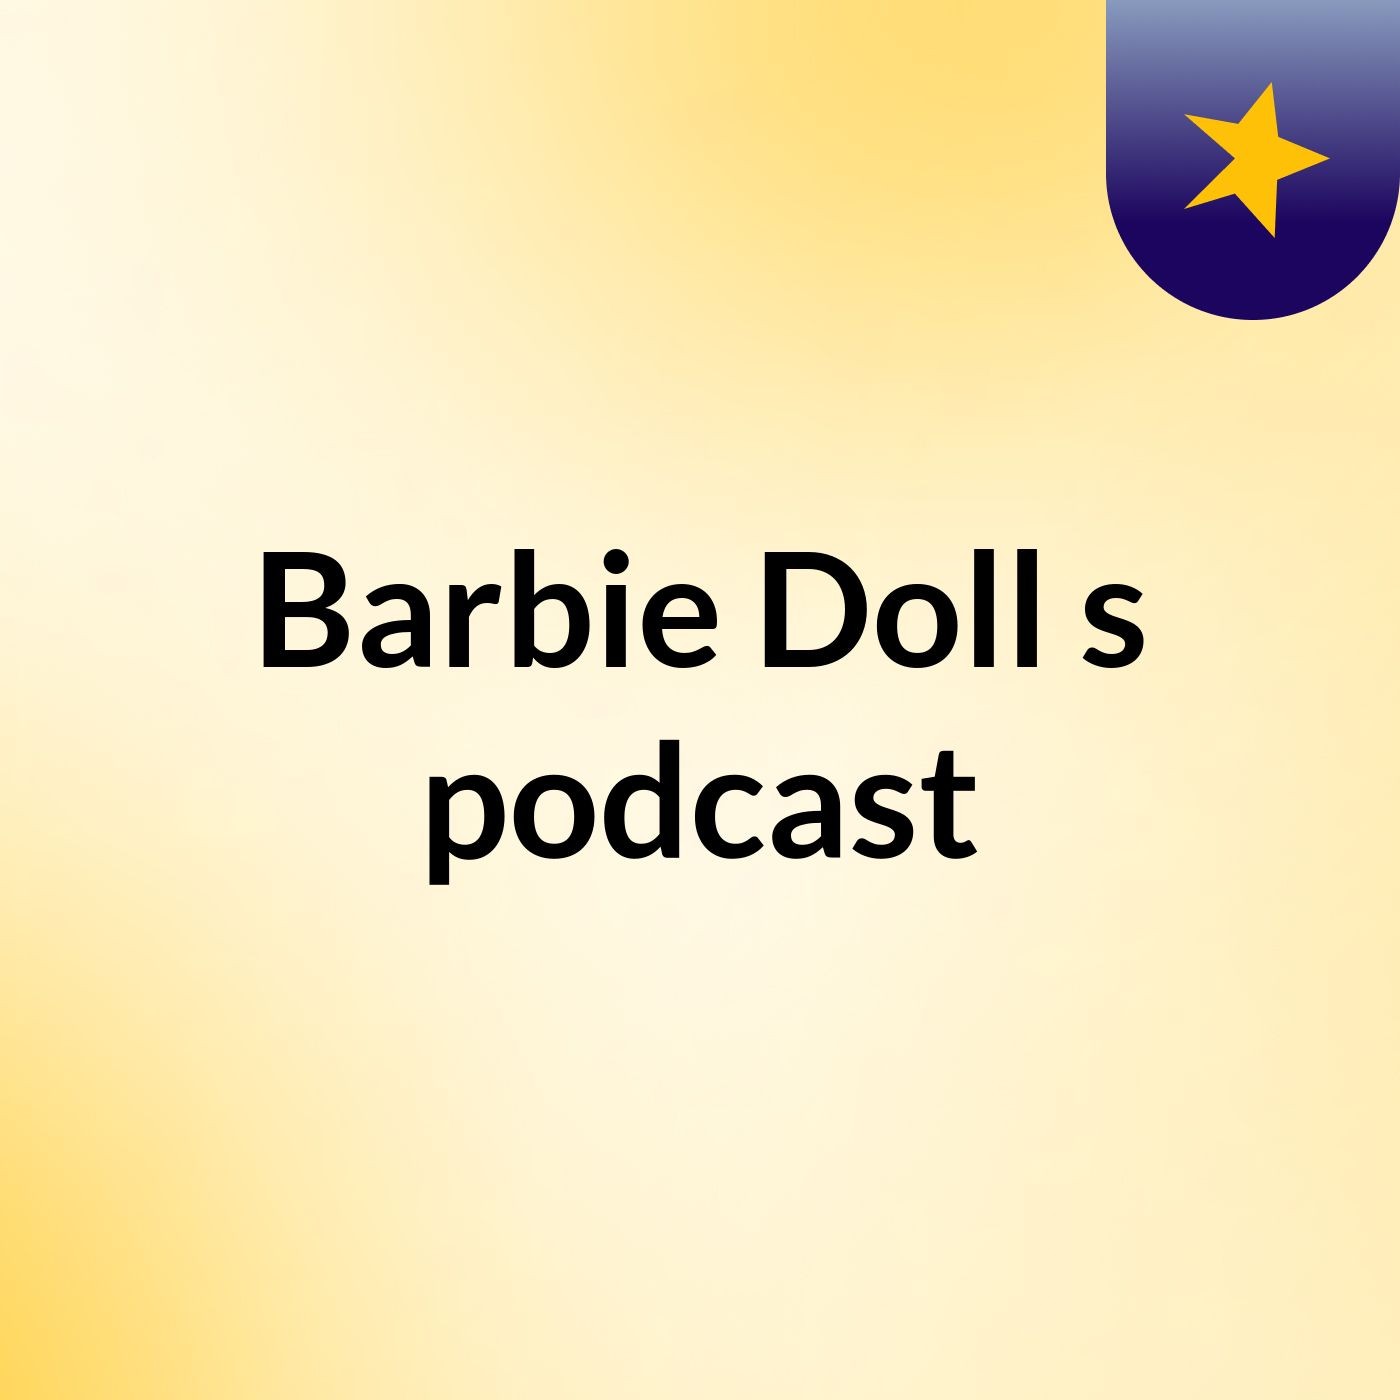 Barbie Doll's podcast